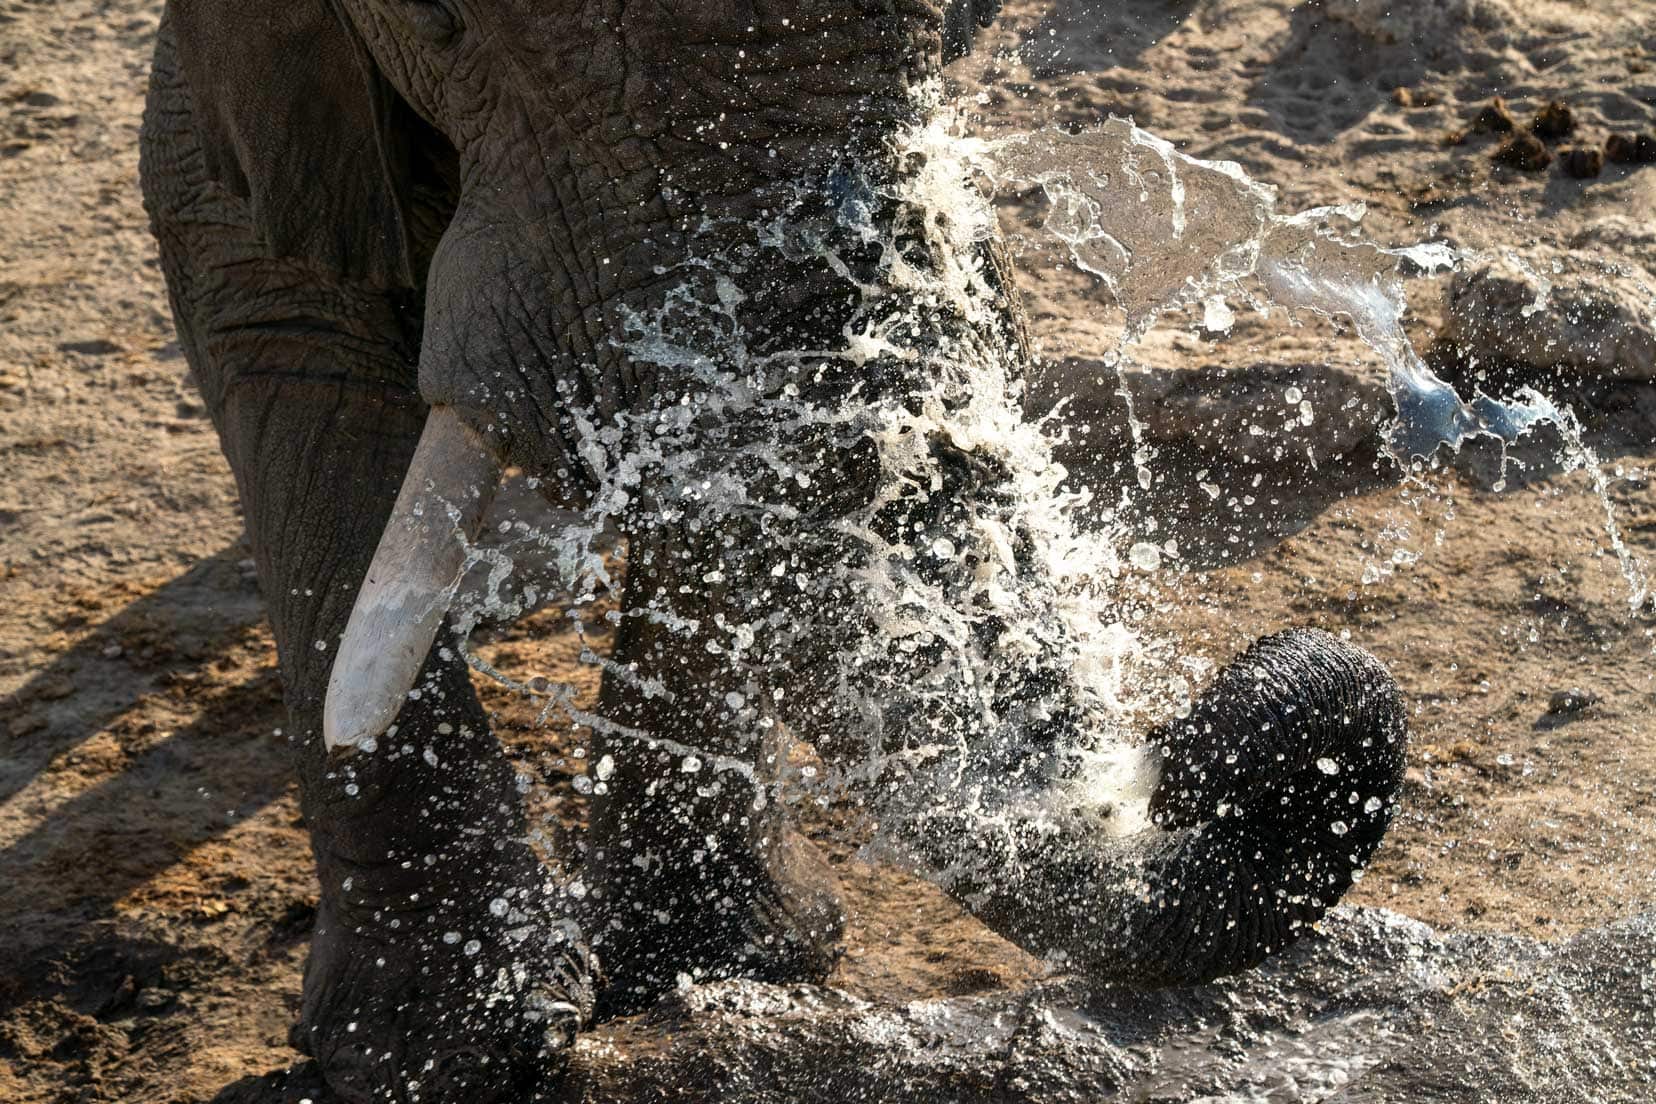 elephant-blowing-water with lots of water in the air